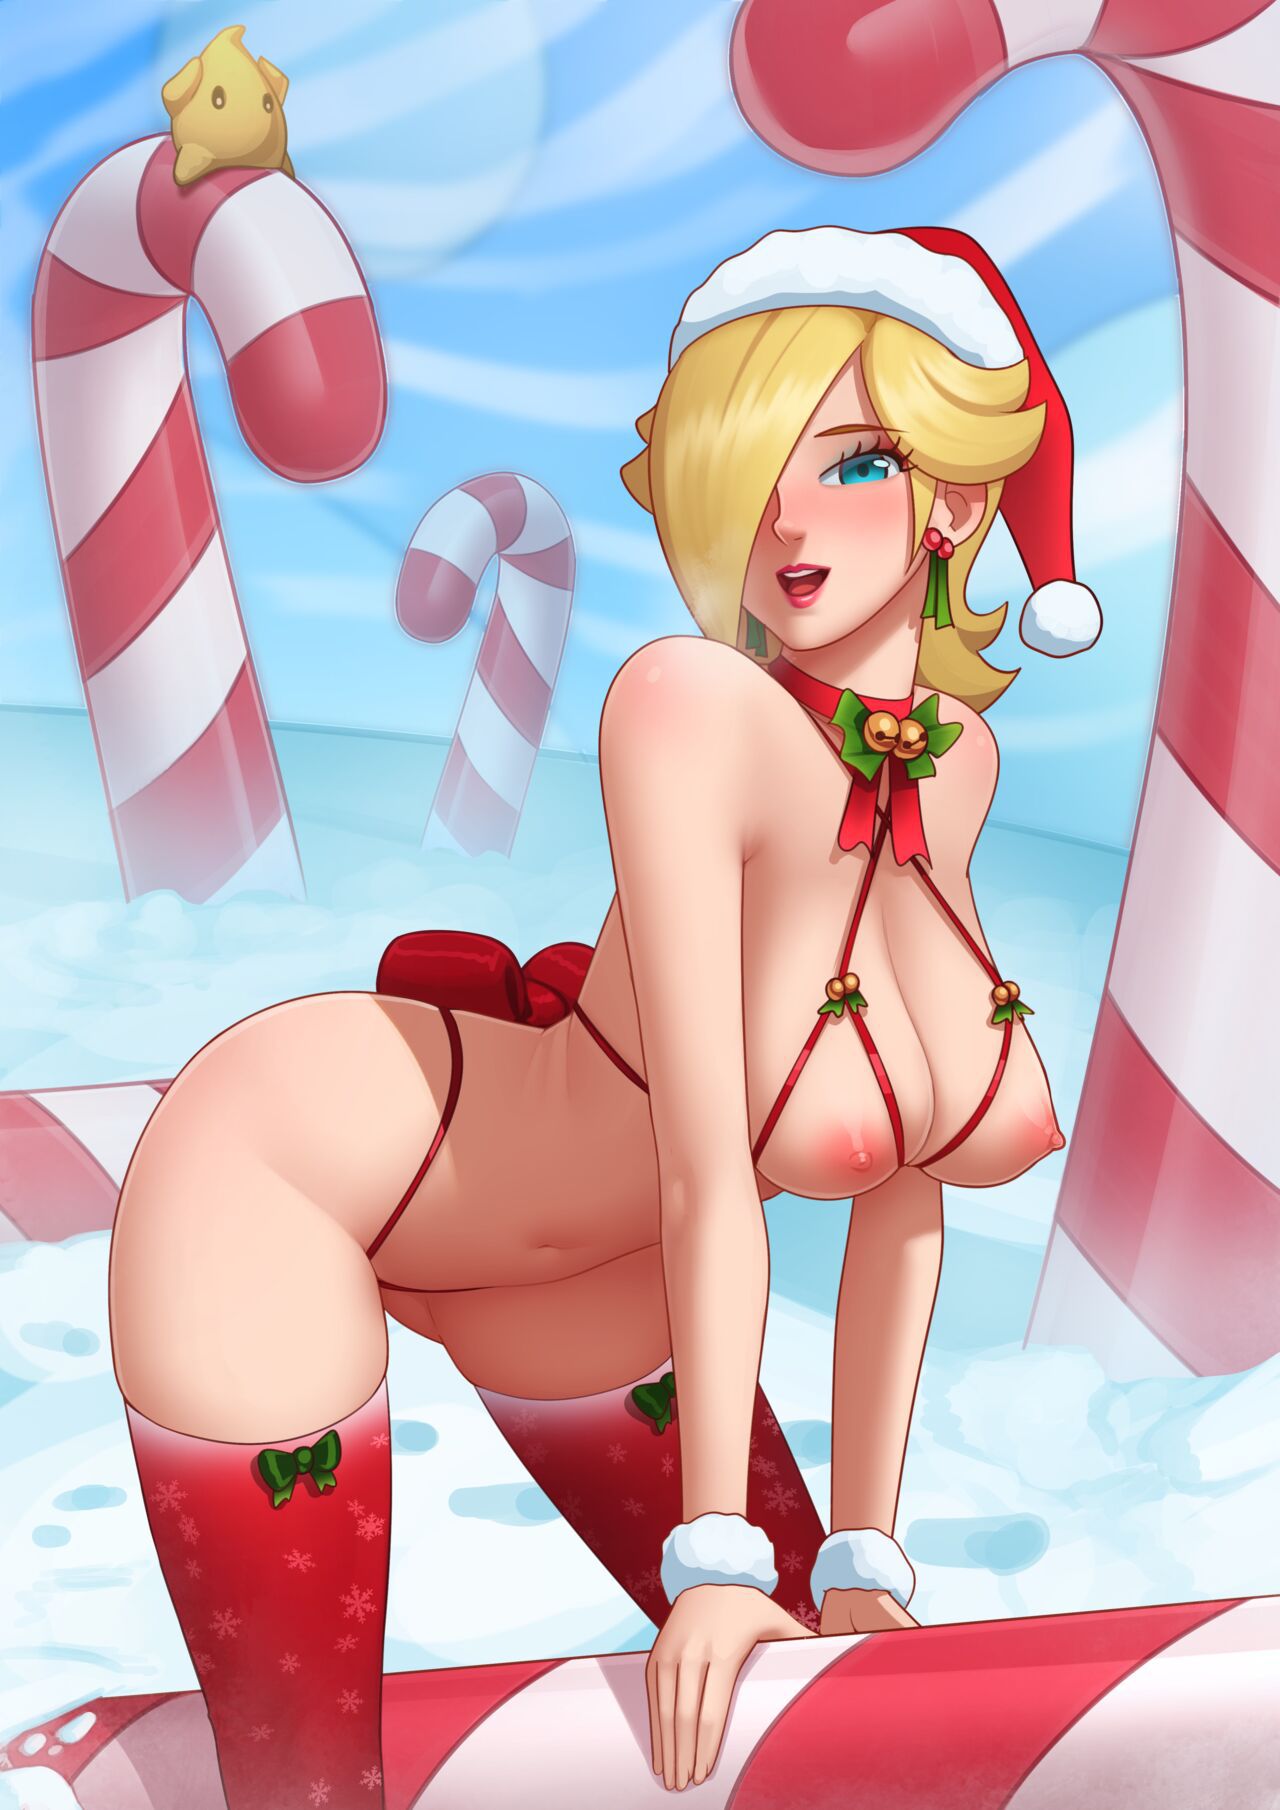 [Deilan12] Candy Canes Appeared 12